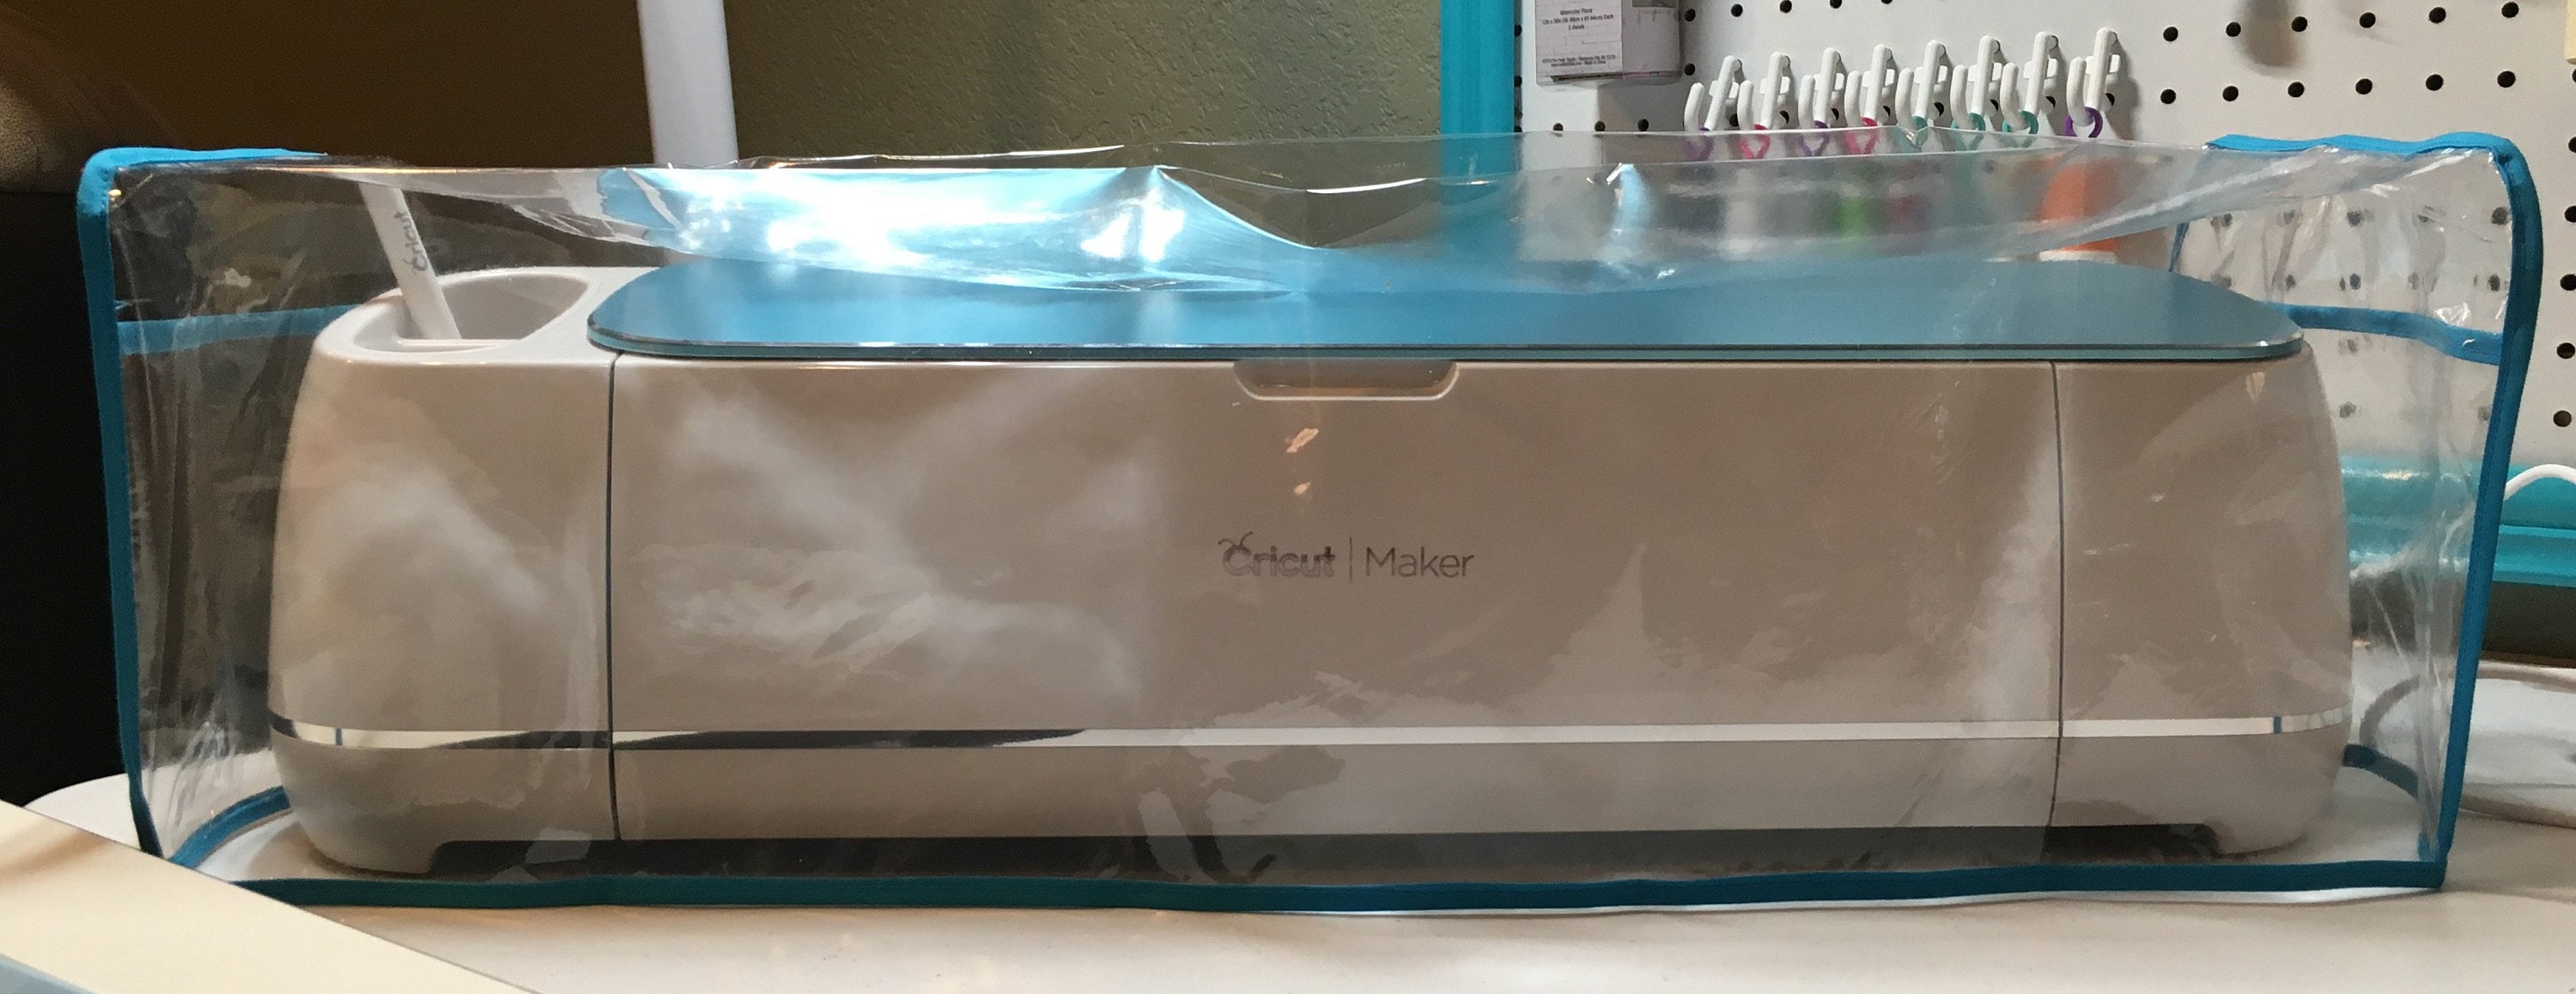 Dust Cover for Cricut EasyPress 2 - choose 12 x 10 or 9 X 9 Clear Plastic  with Bias Trim